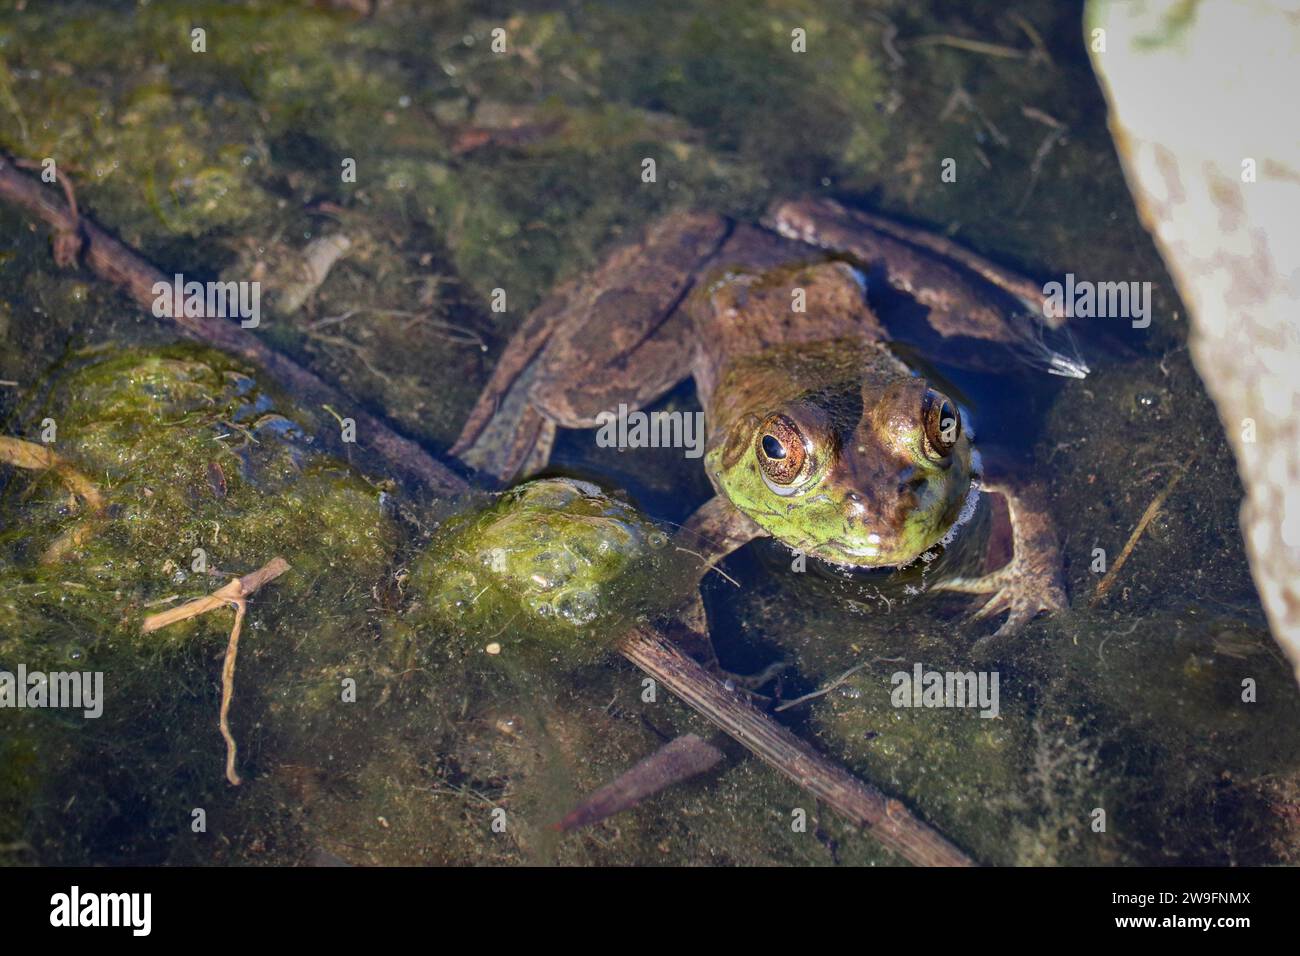 American Bullfrog or Lithobates catesbeianus resting in a pond at the Veteran's oasis park in Arizona. Stock Photo